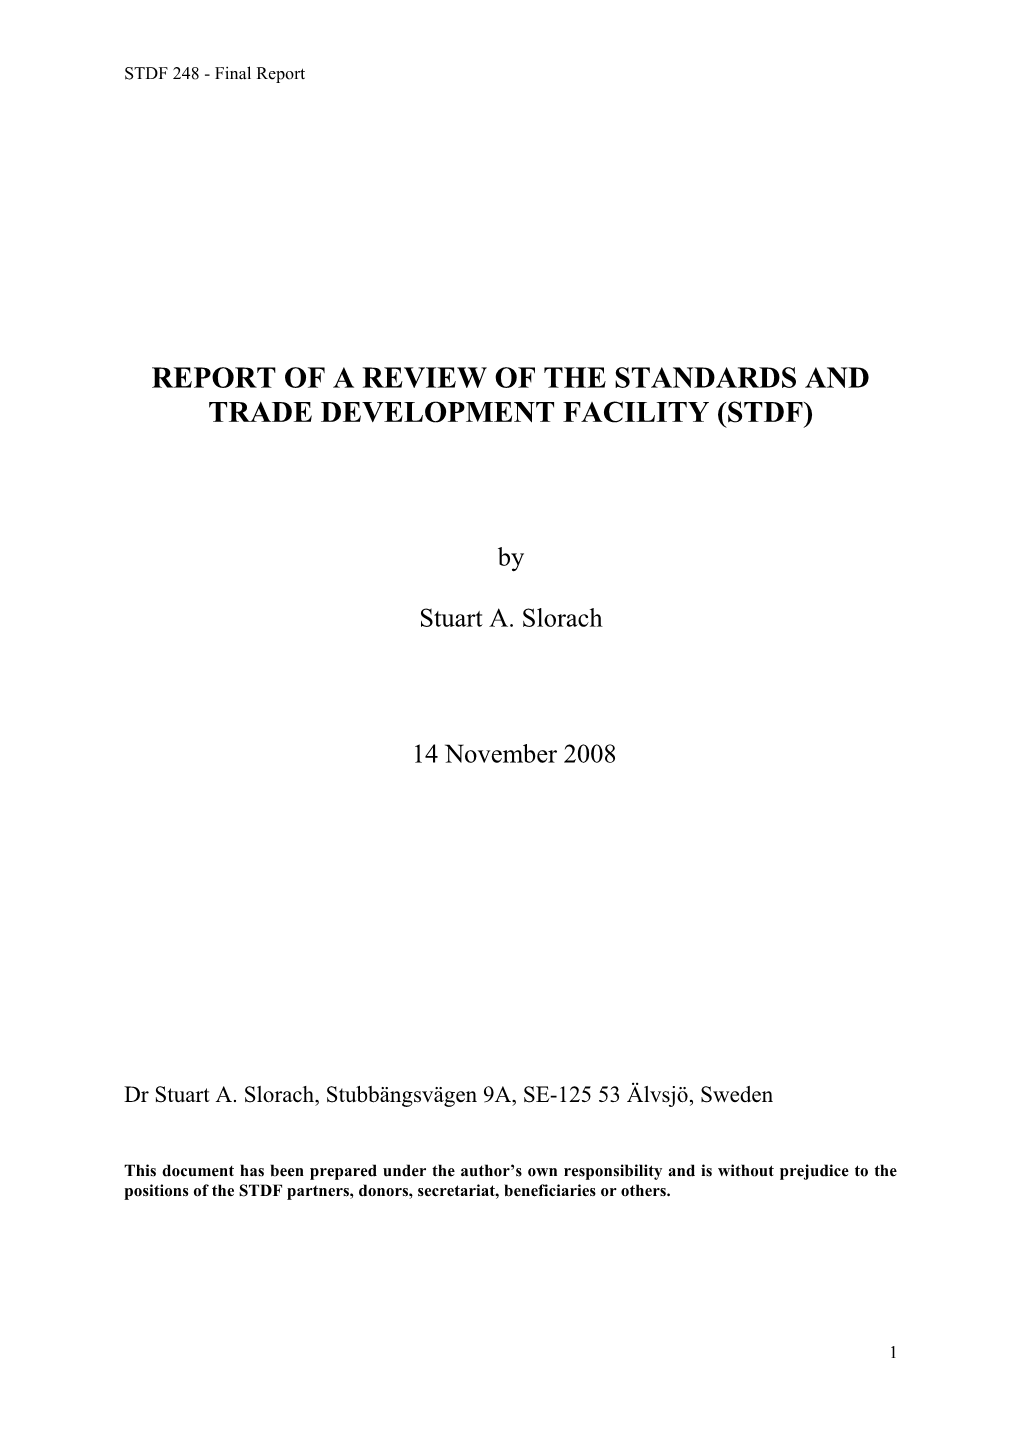 Report of a Review of the Standards and Trade Development Facility (Stdf)